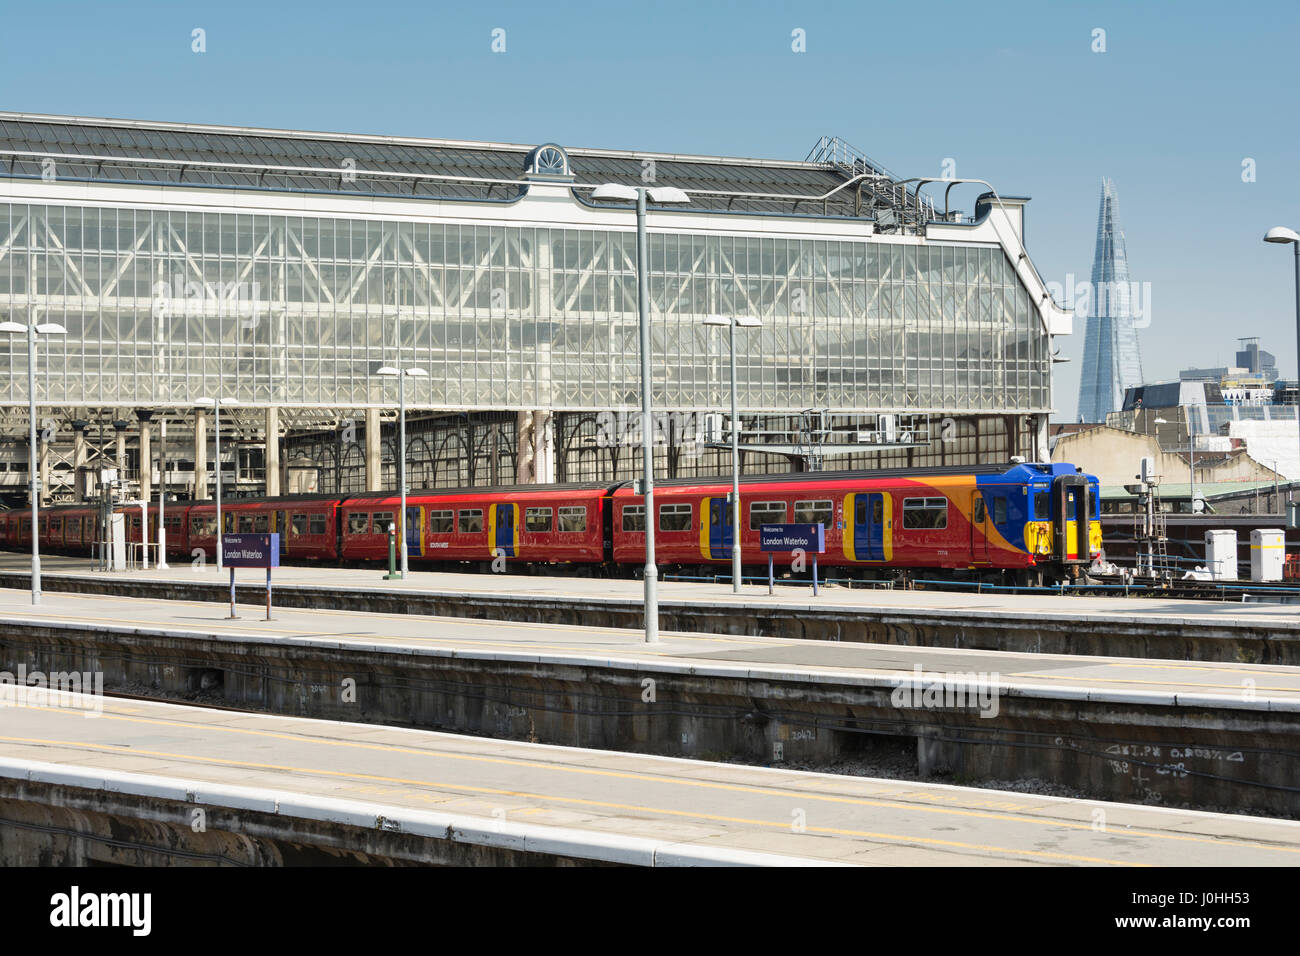 South West Trains leaving from the old shorter platforms at London Waterloo station on a bright, sunny day Stock Photo